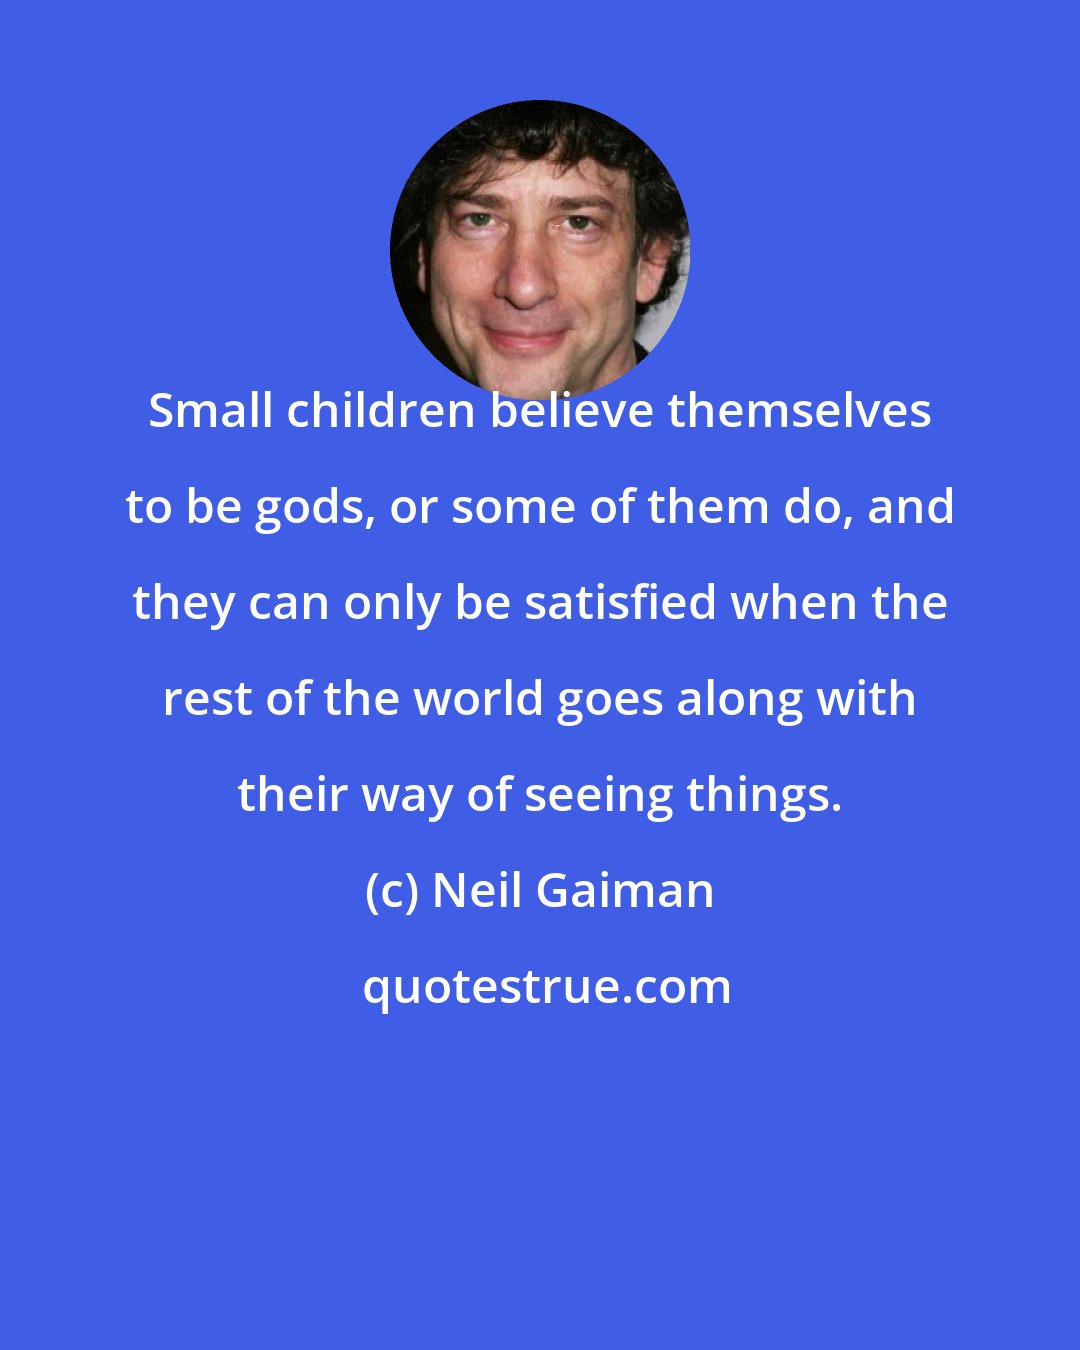 Neil Gaiman: Small children believe themselves to be gods, or some of them do, and they can only be satisfied when the rest of the world goes along with their way of seeing things.